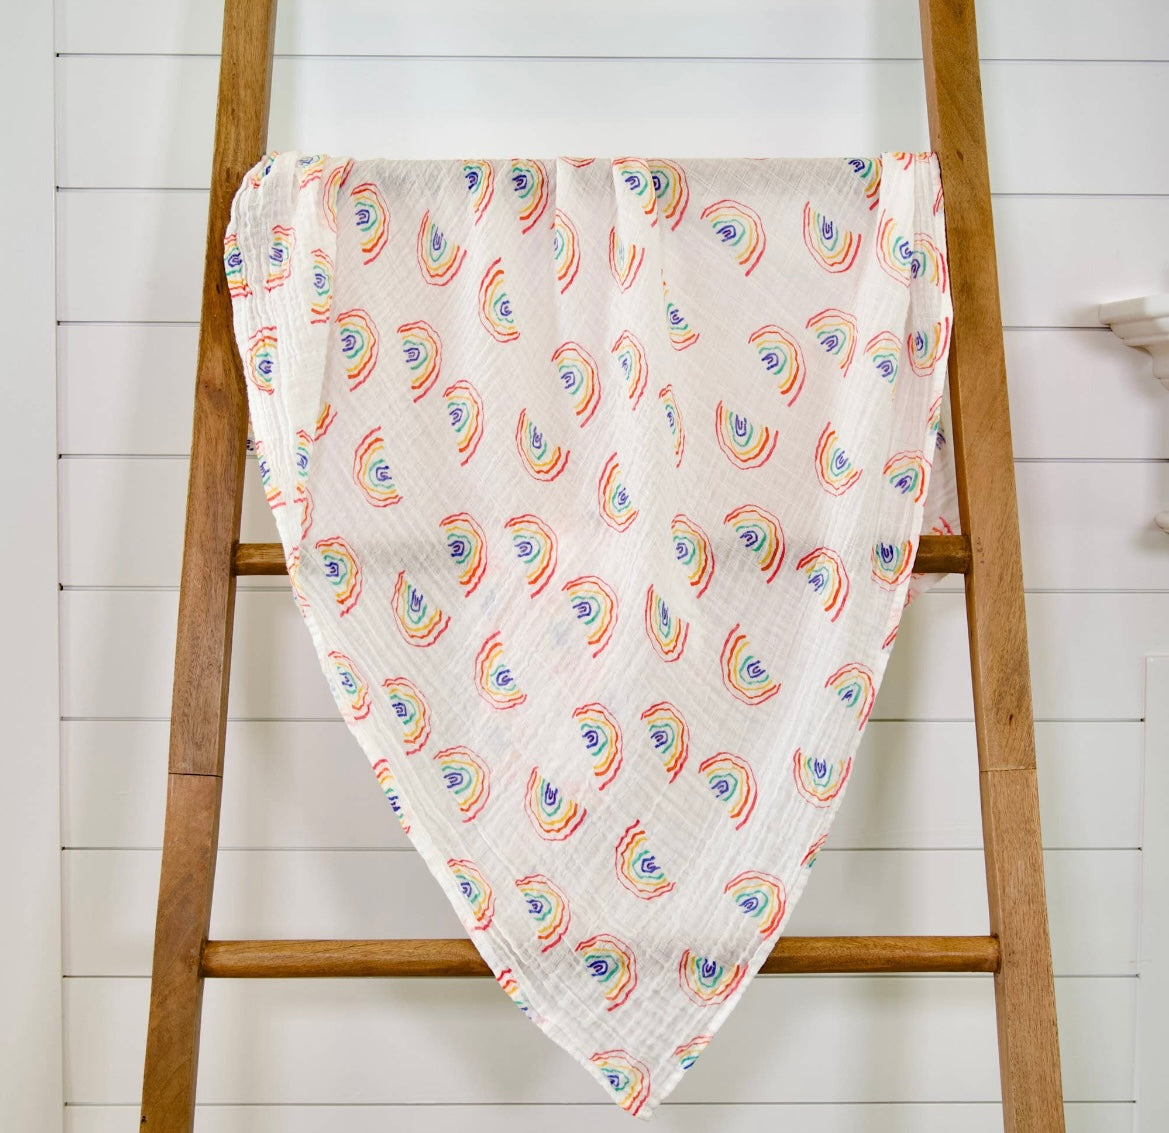 Somewhere Over the Rainbow Swaddle